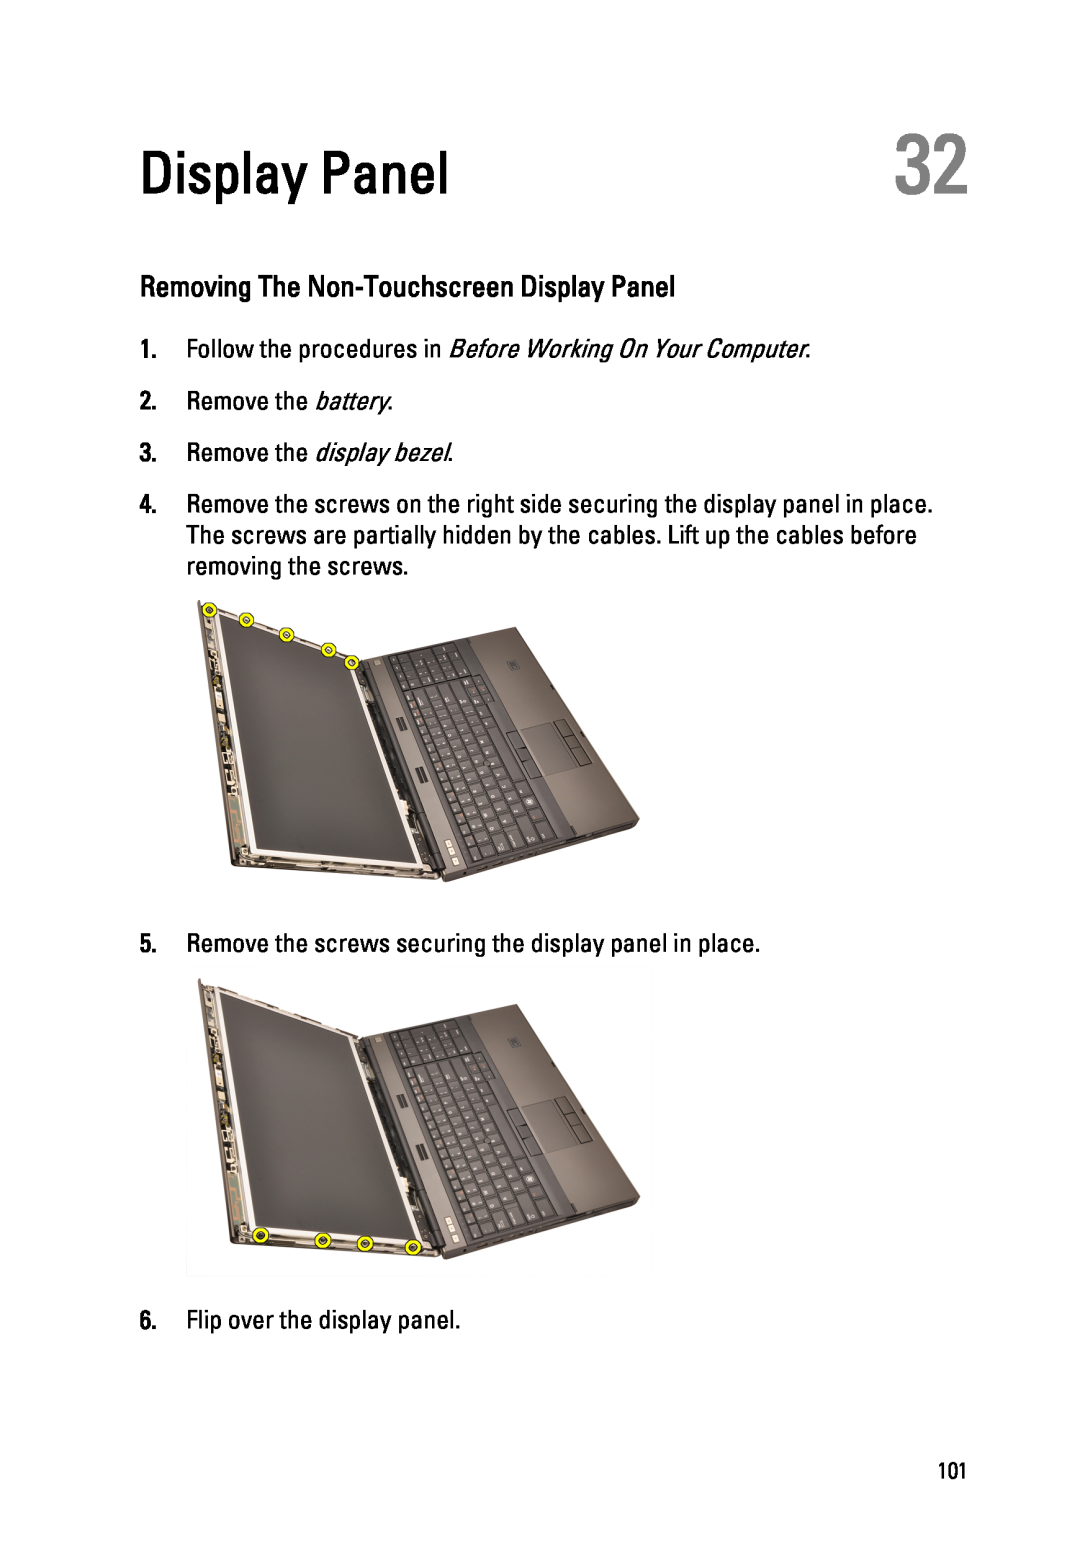 Dell M4600 owner manual Removing The Non-Touchscreen Display Panel, Remove the display bezel 